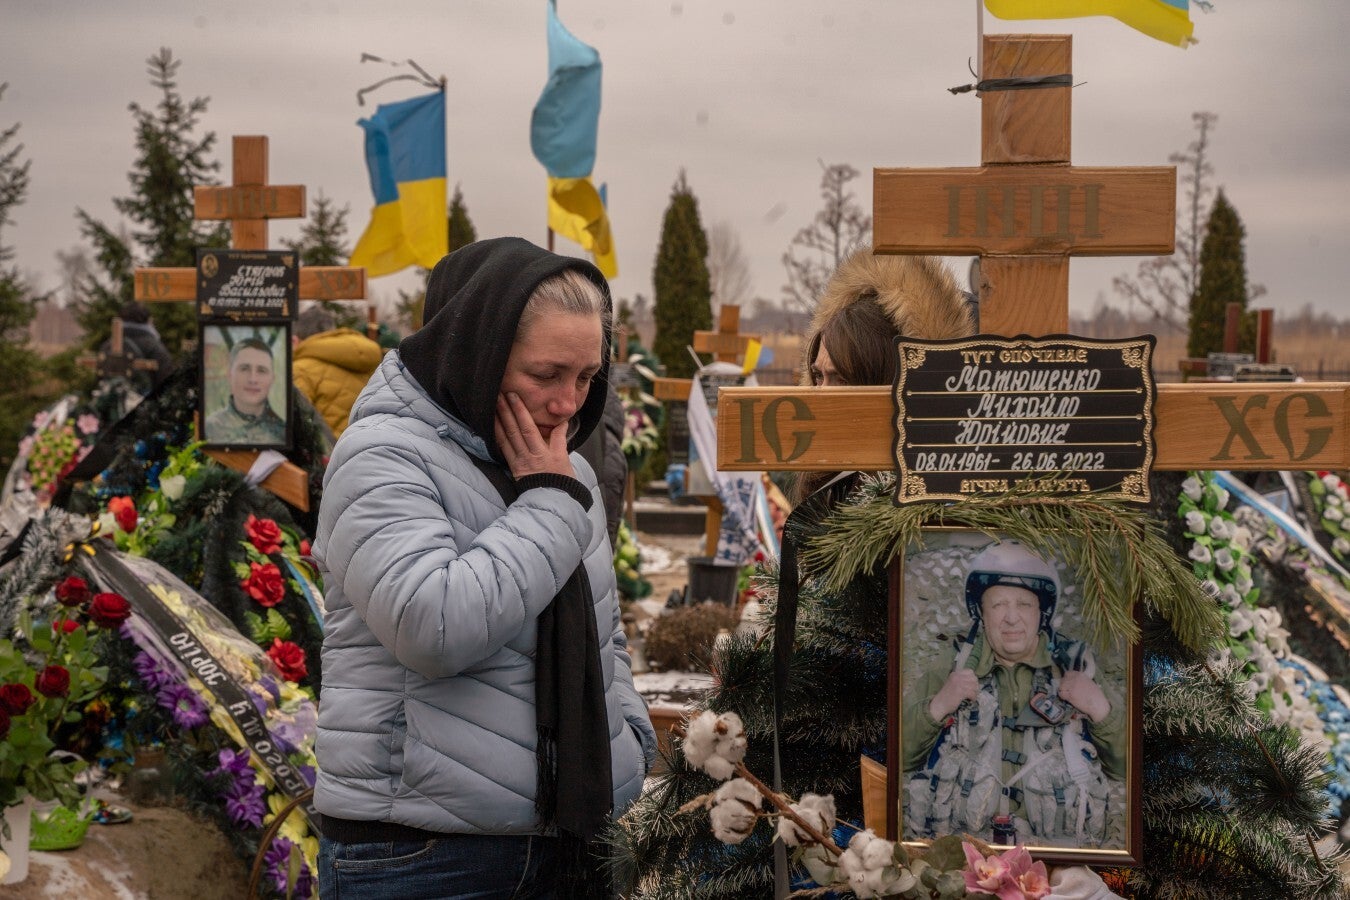 Tetiana’s son joined the Azov brigade and was killed a month ago in Bakhmut